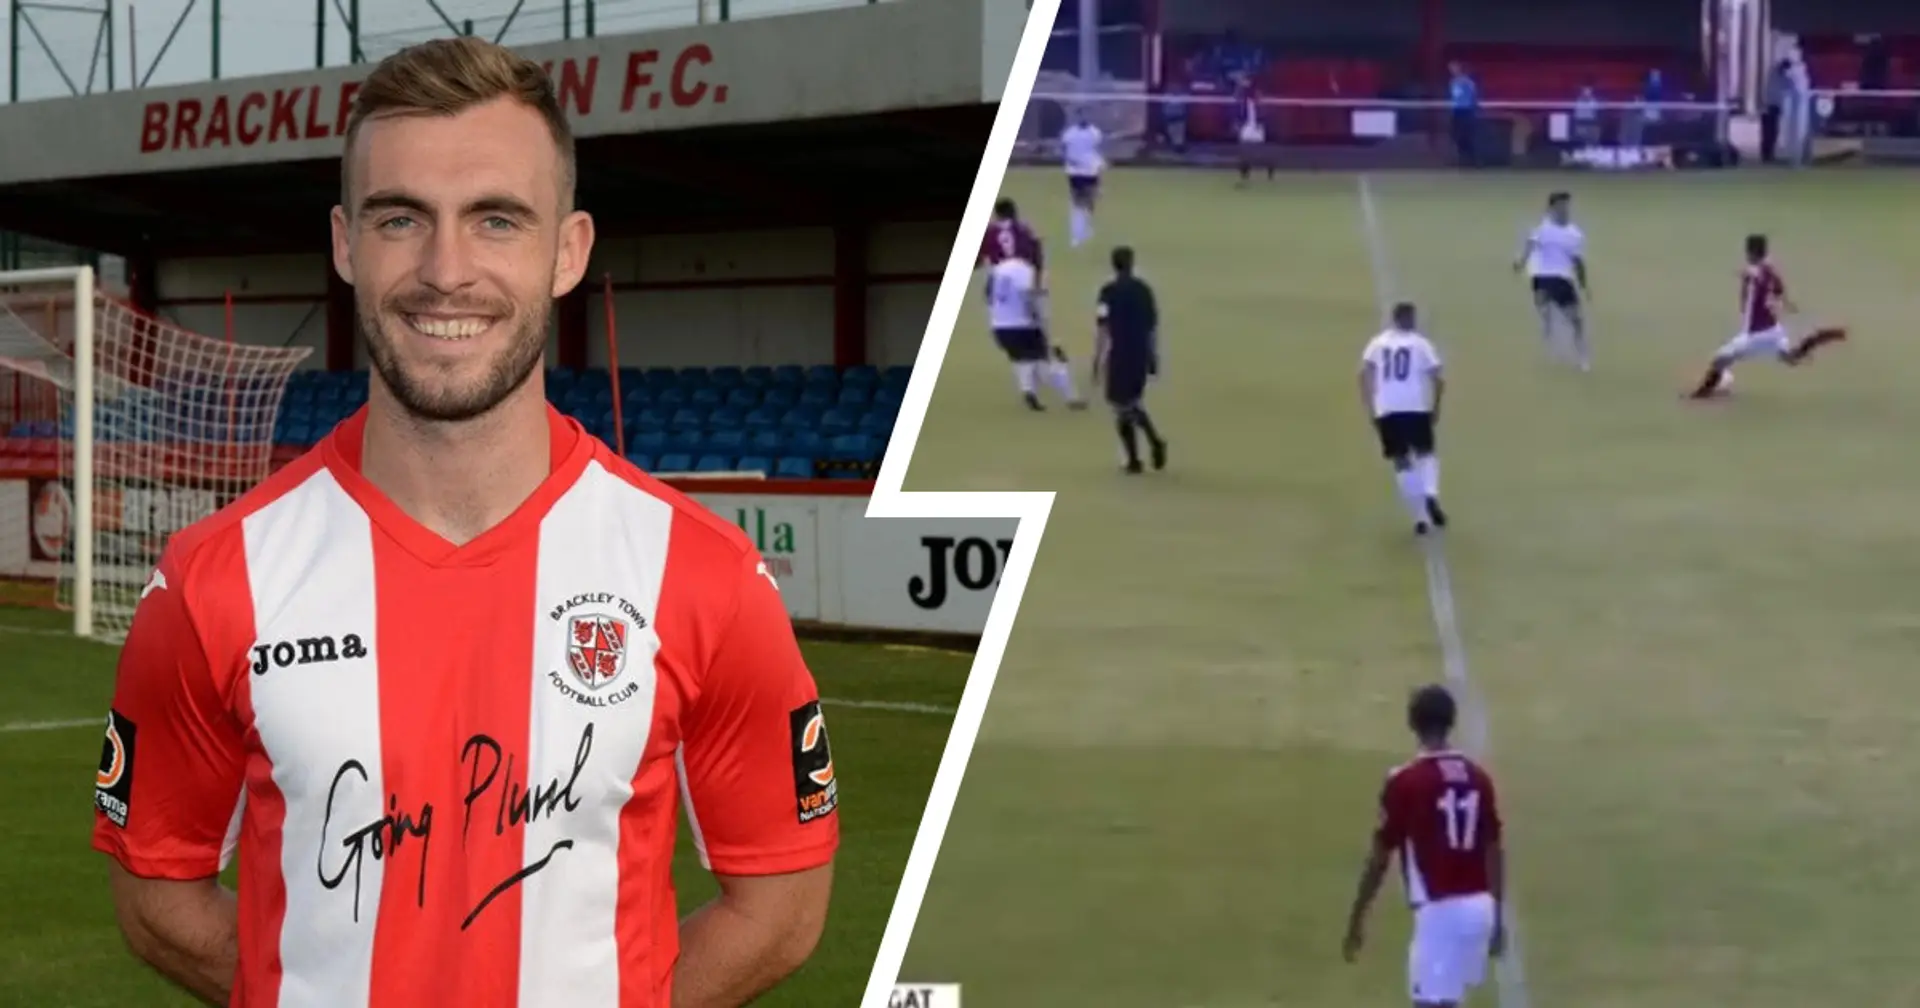 Former Leicester City midfielder Shane Byrne scores goal from beyond halfway line in England's sixth tier